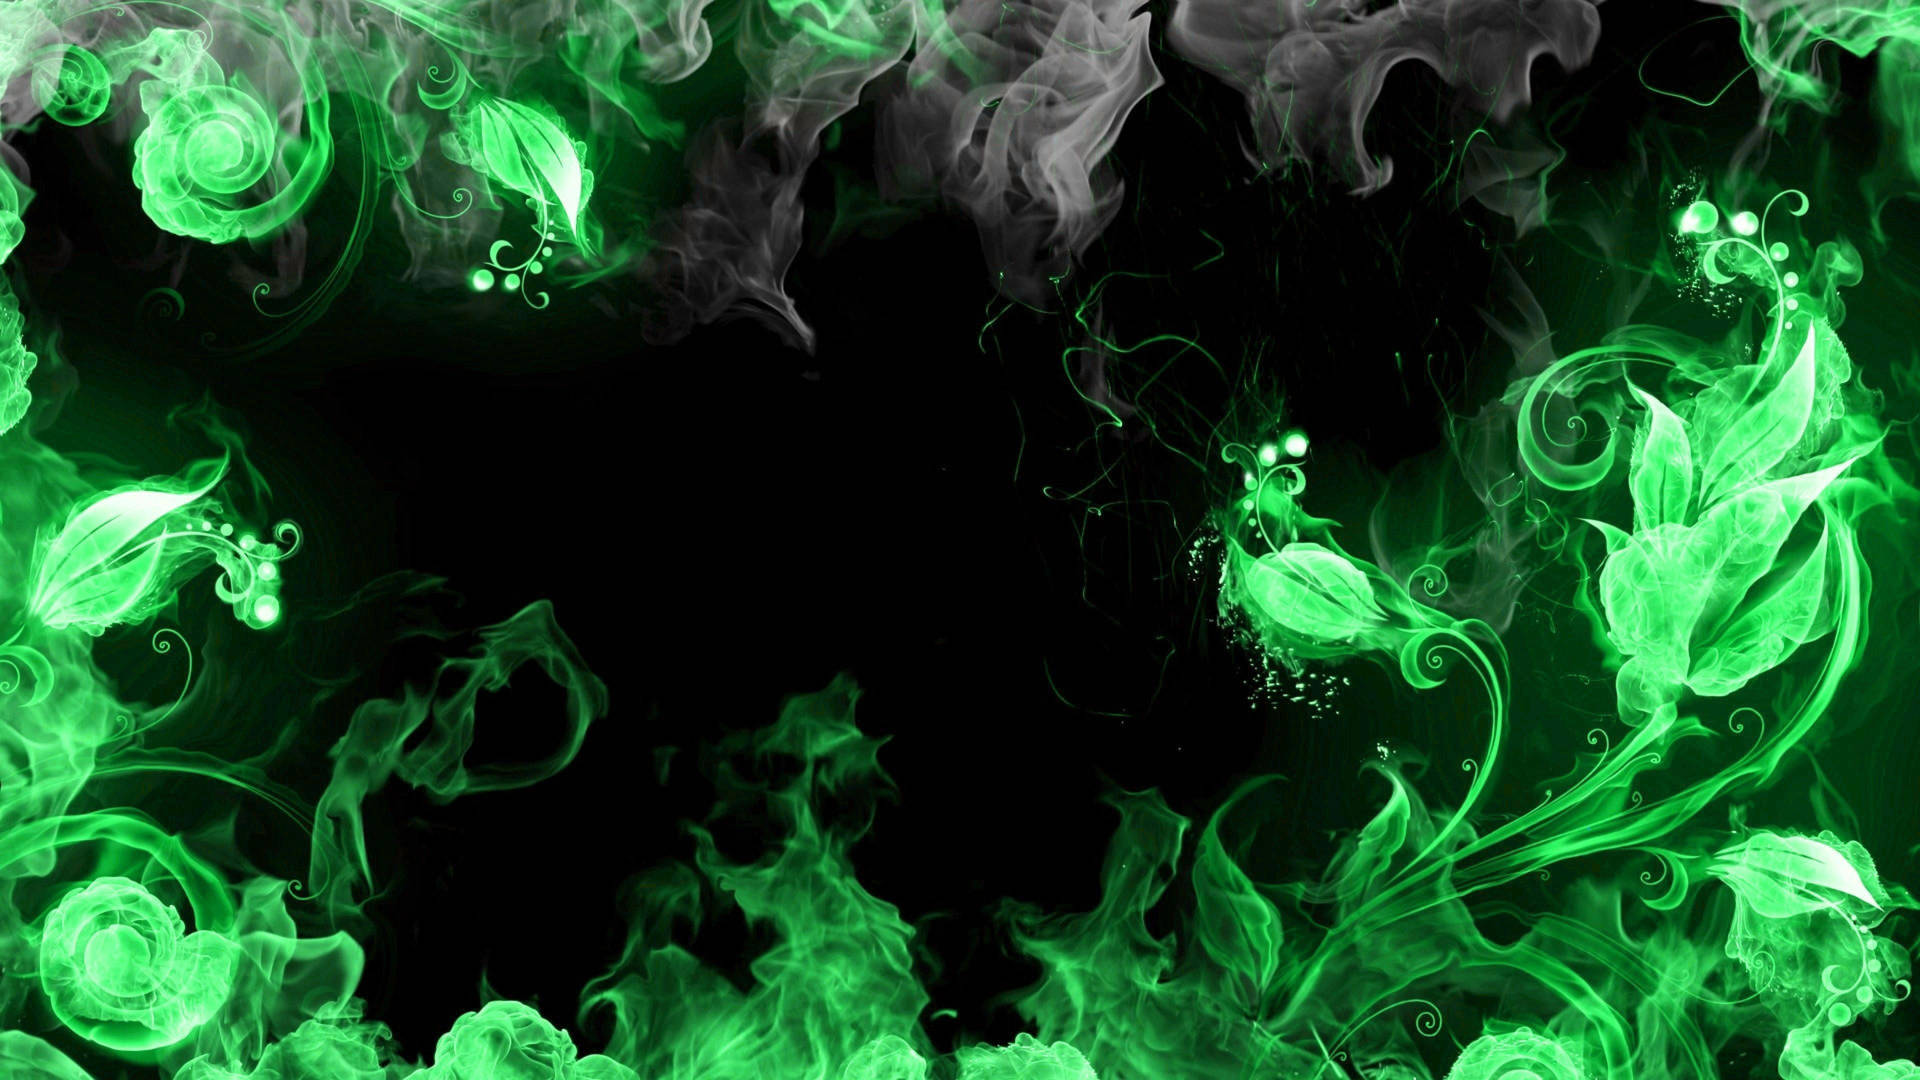 Wallpaper paint smoke gas images for desktop section абстракции   download